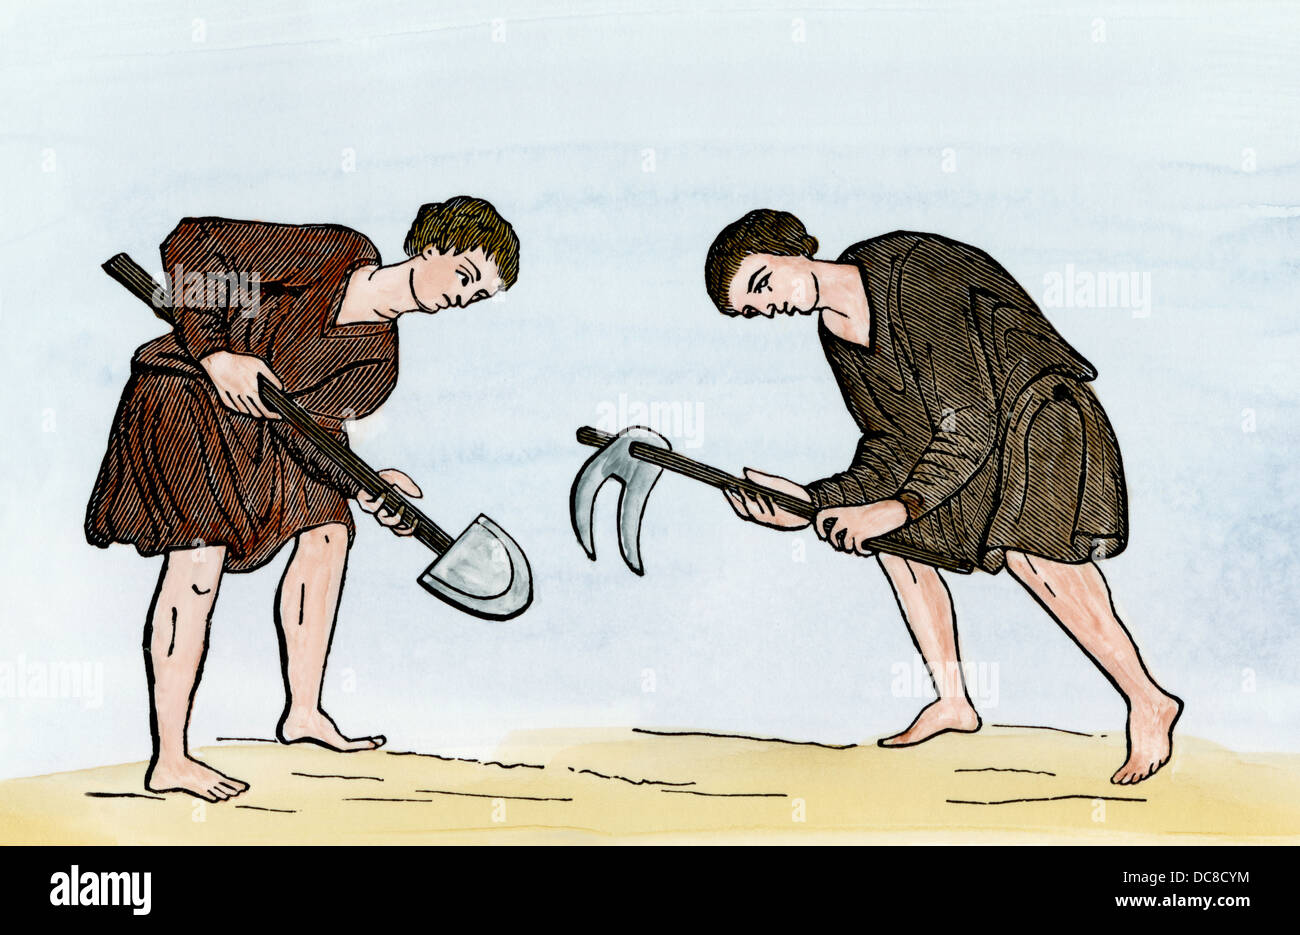 European serfs farming with a hoe and shovel, 1100s. Hand-colored woodcut Stock Photo